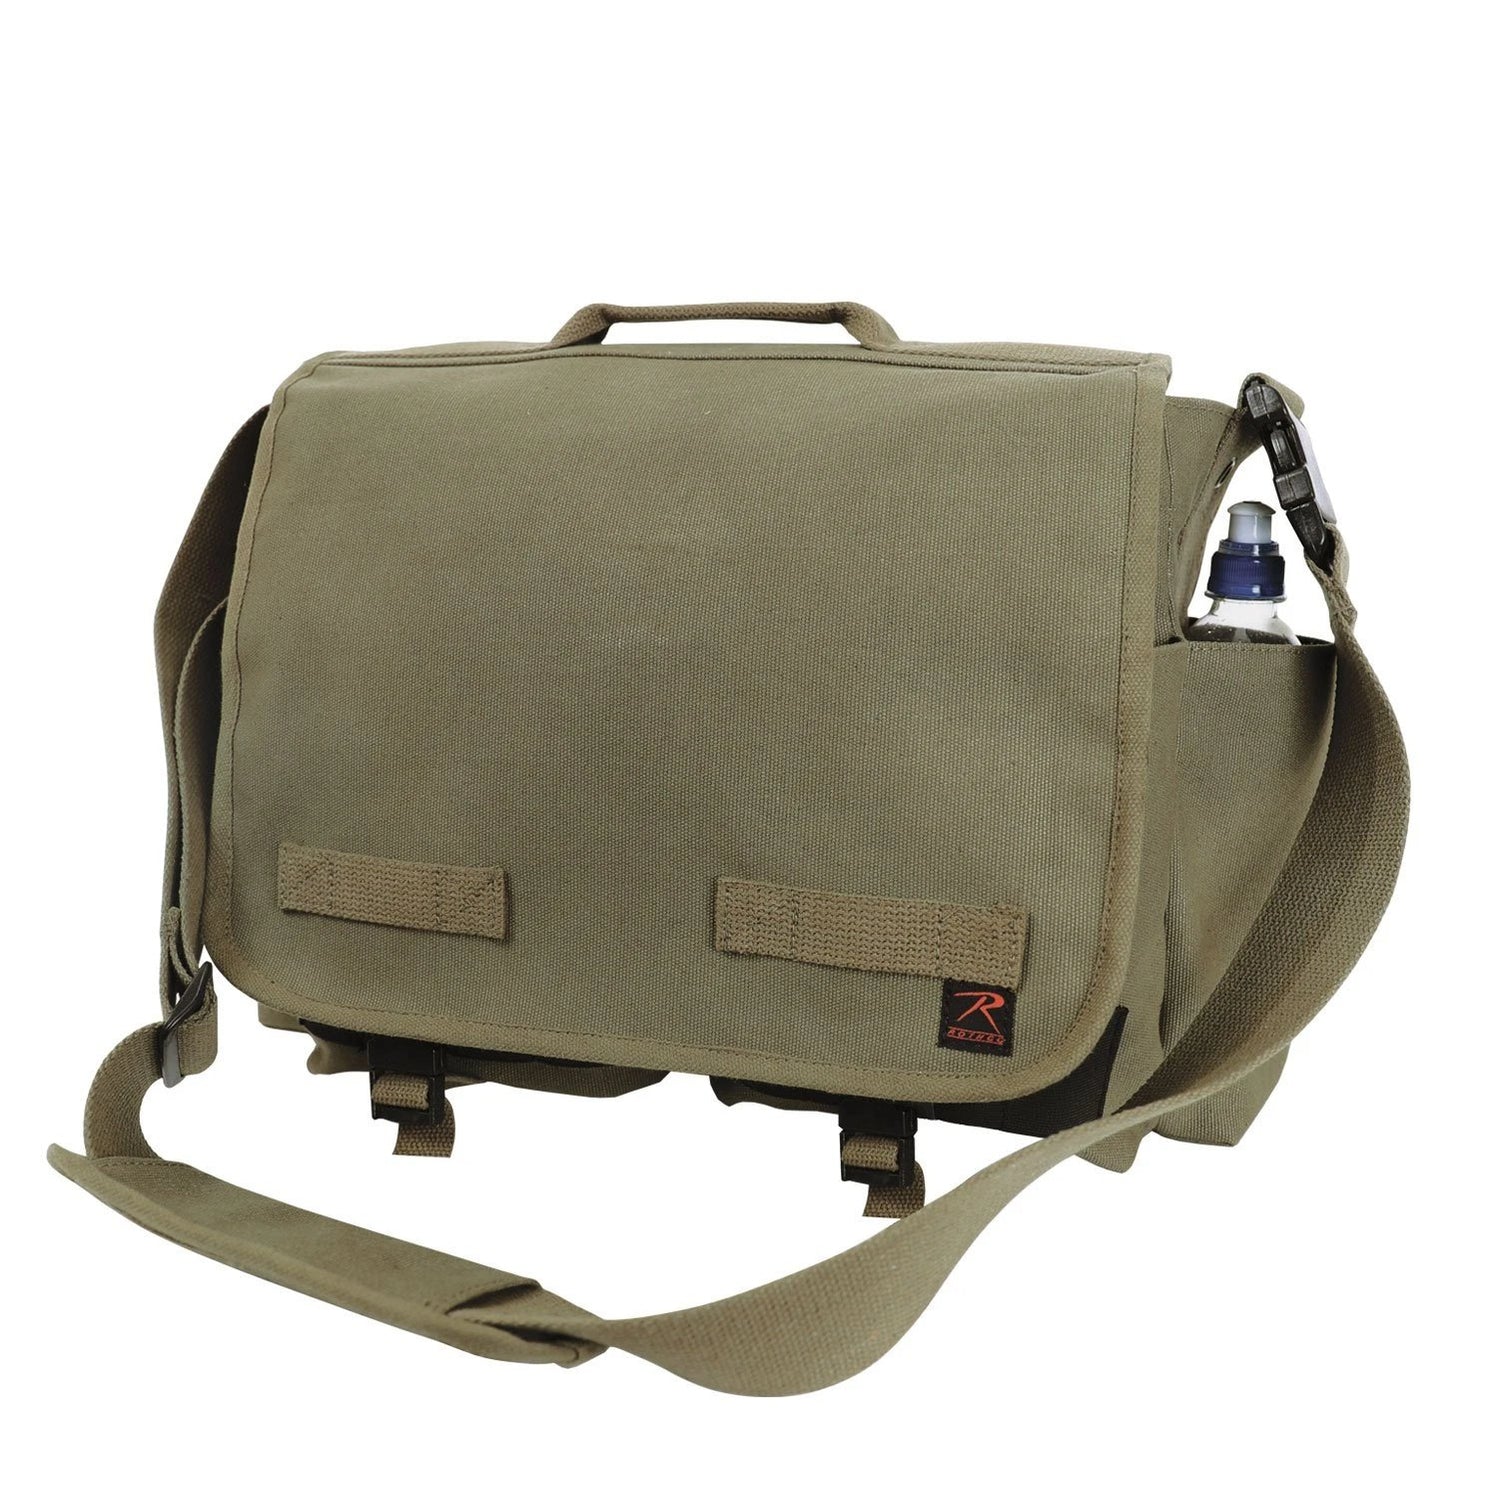 Rothco Concealed Carry Messenger Bag - Luminary Global